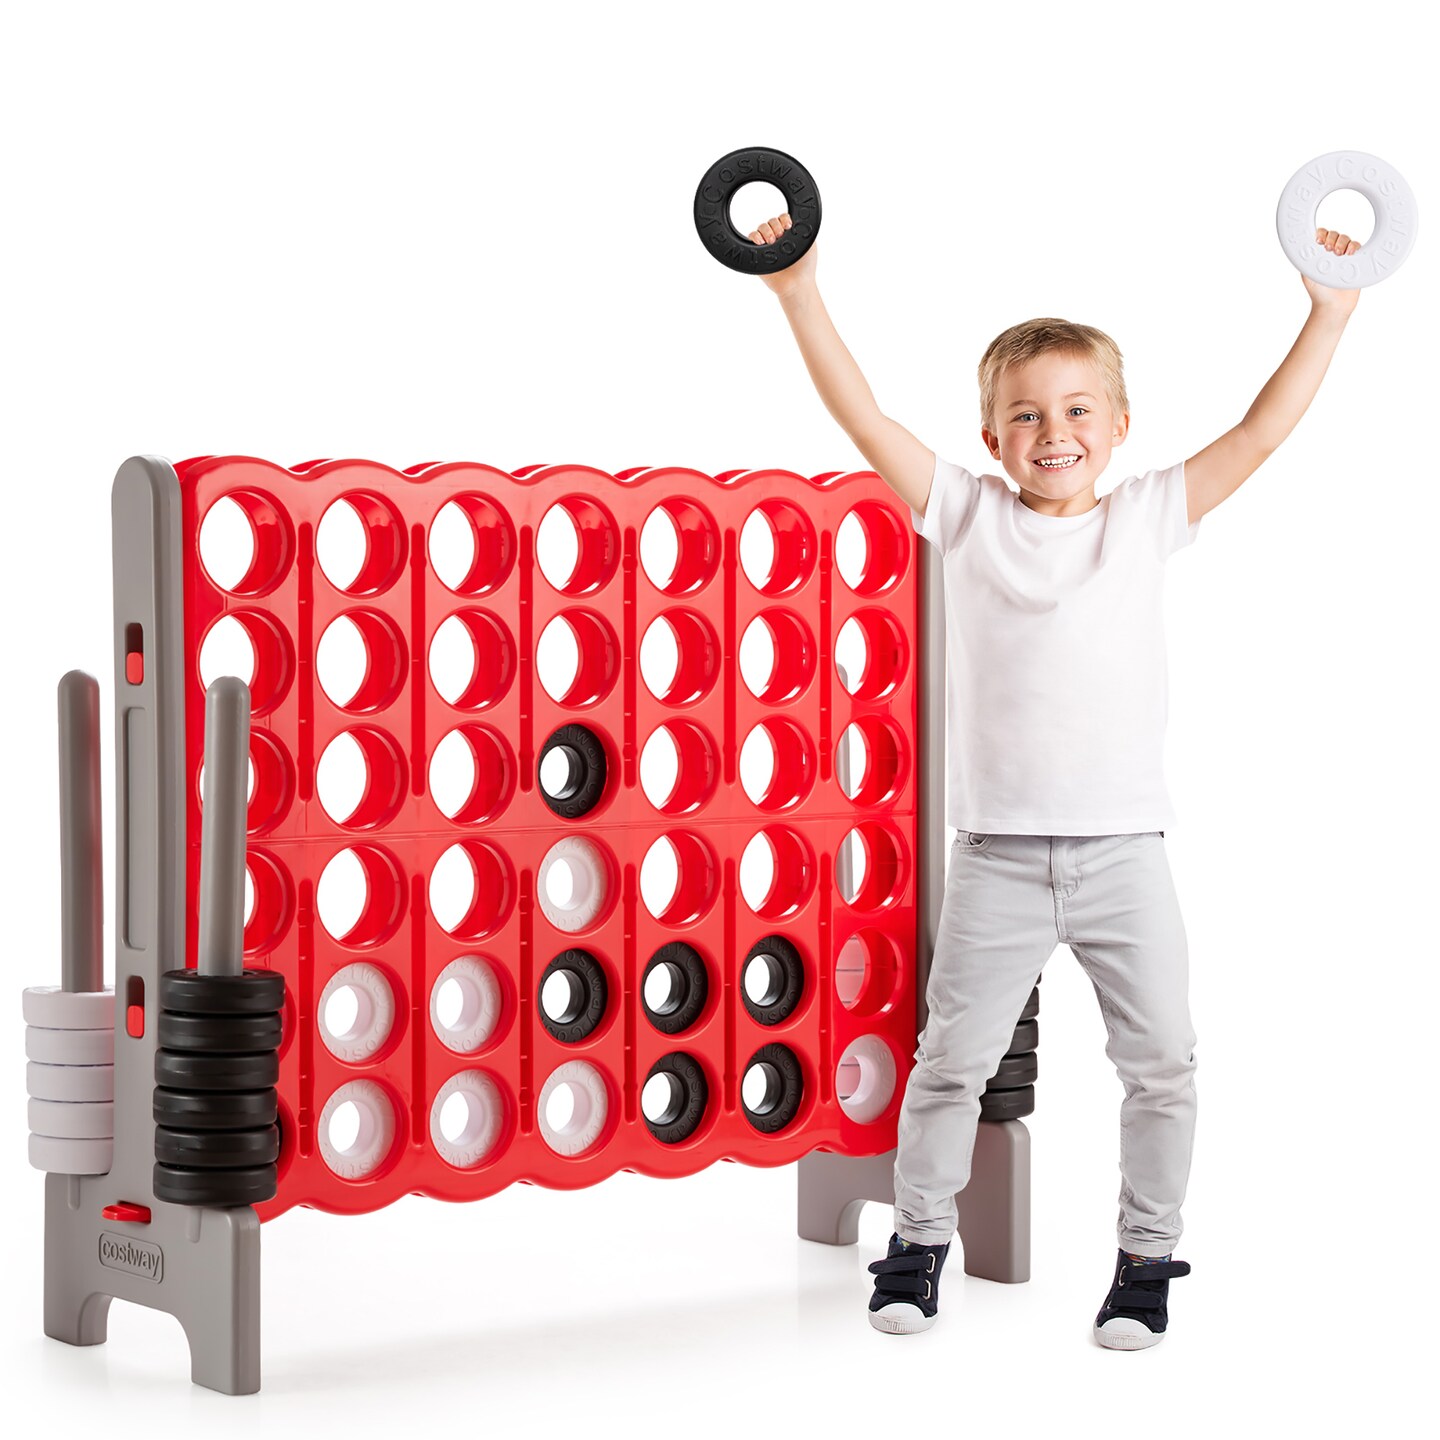 Costway Jumbo 4-to-Score 4 in A Row Giant Game Set Outdoor Indoor Kids Adults Family Fun Red\Black